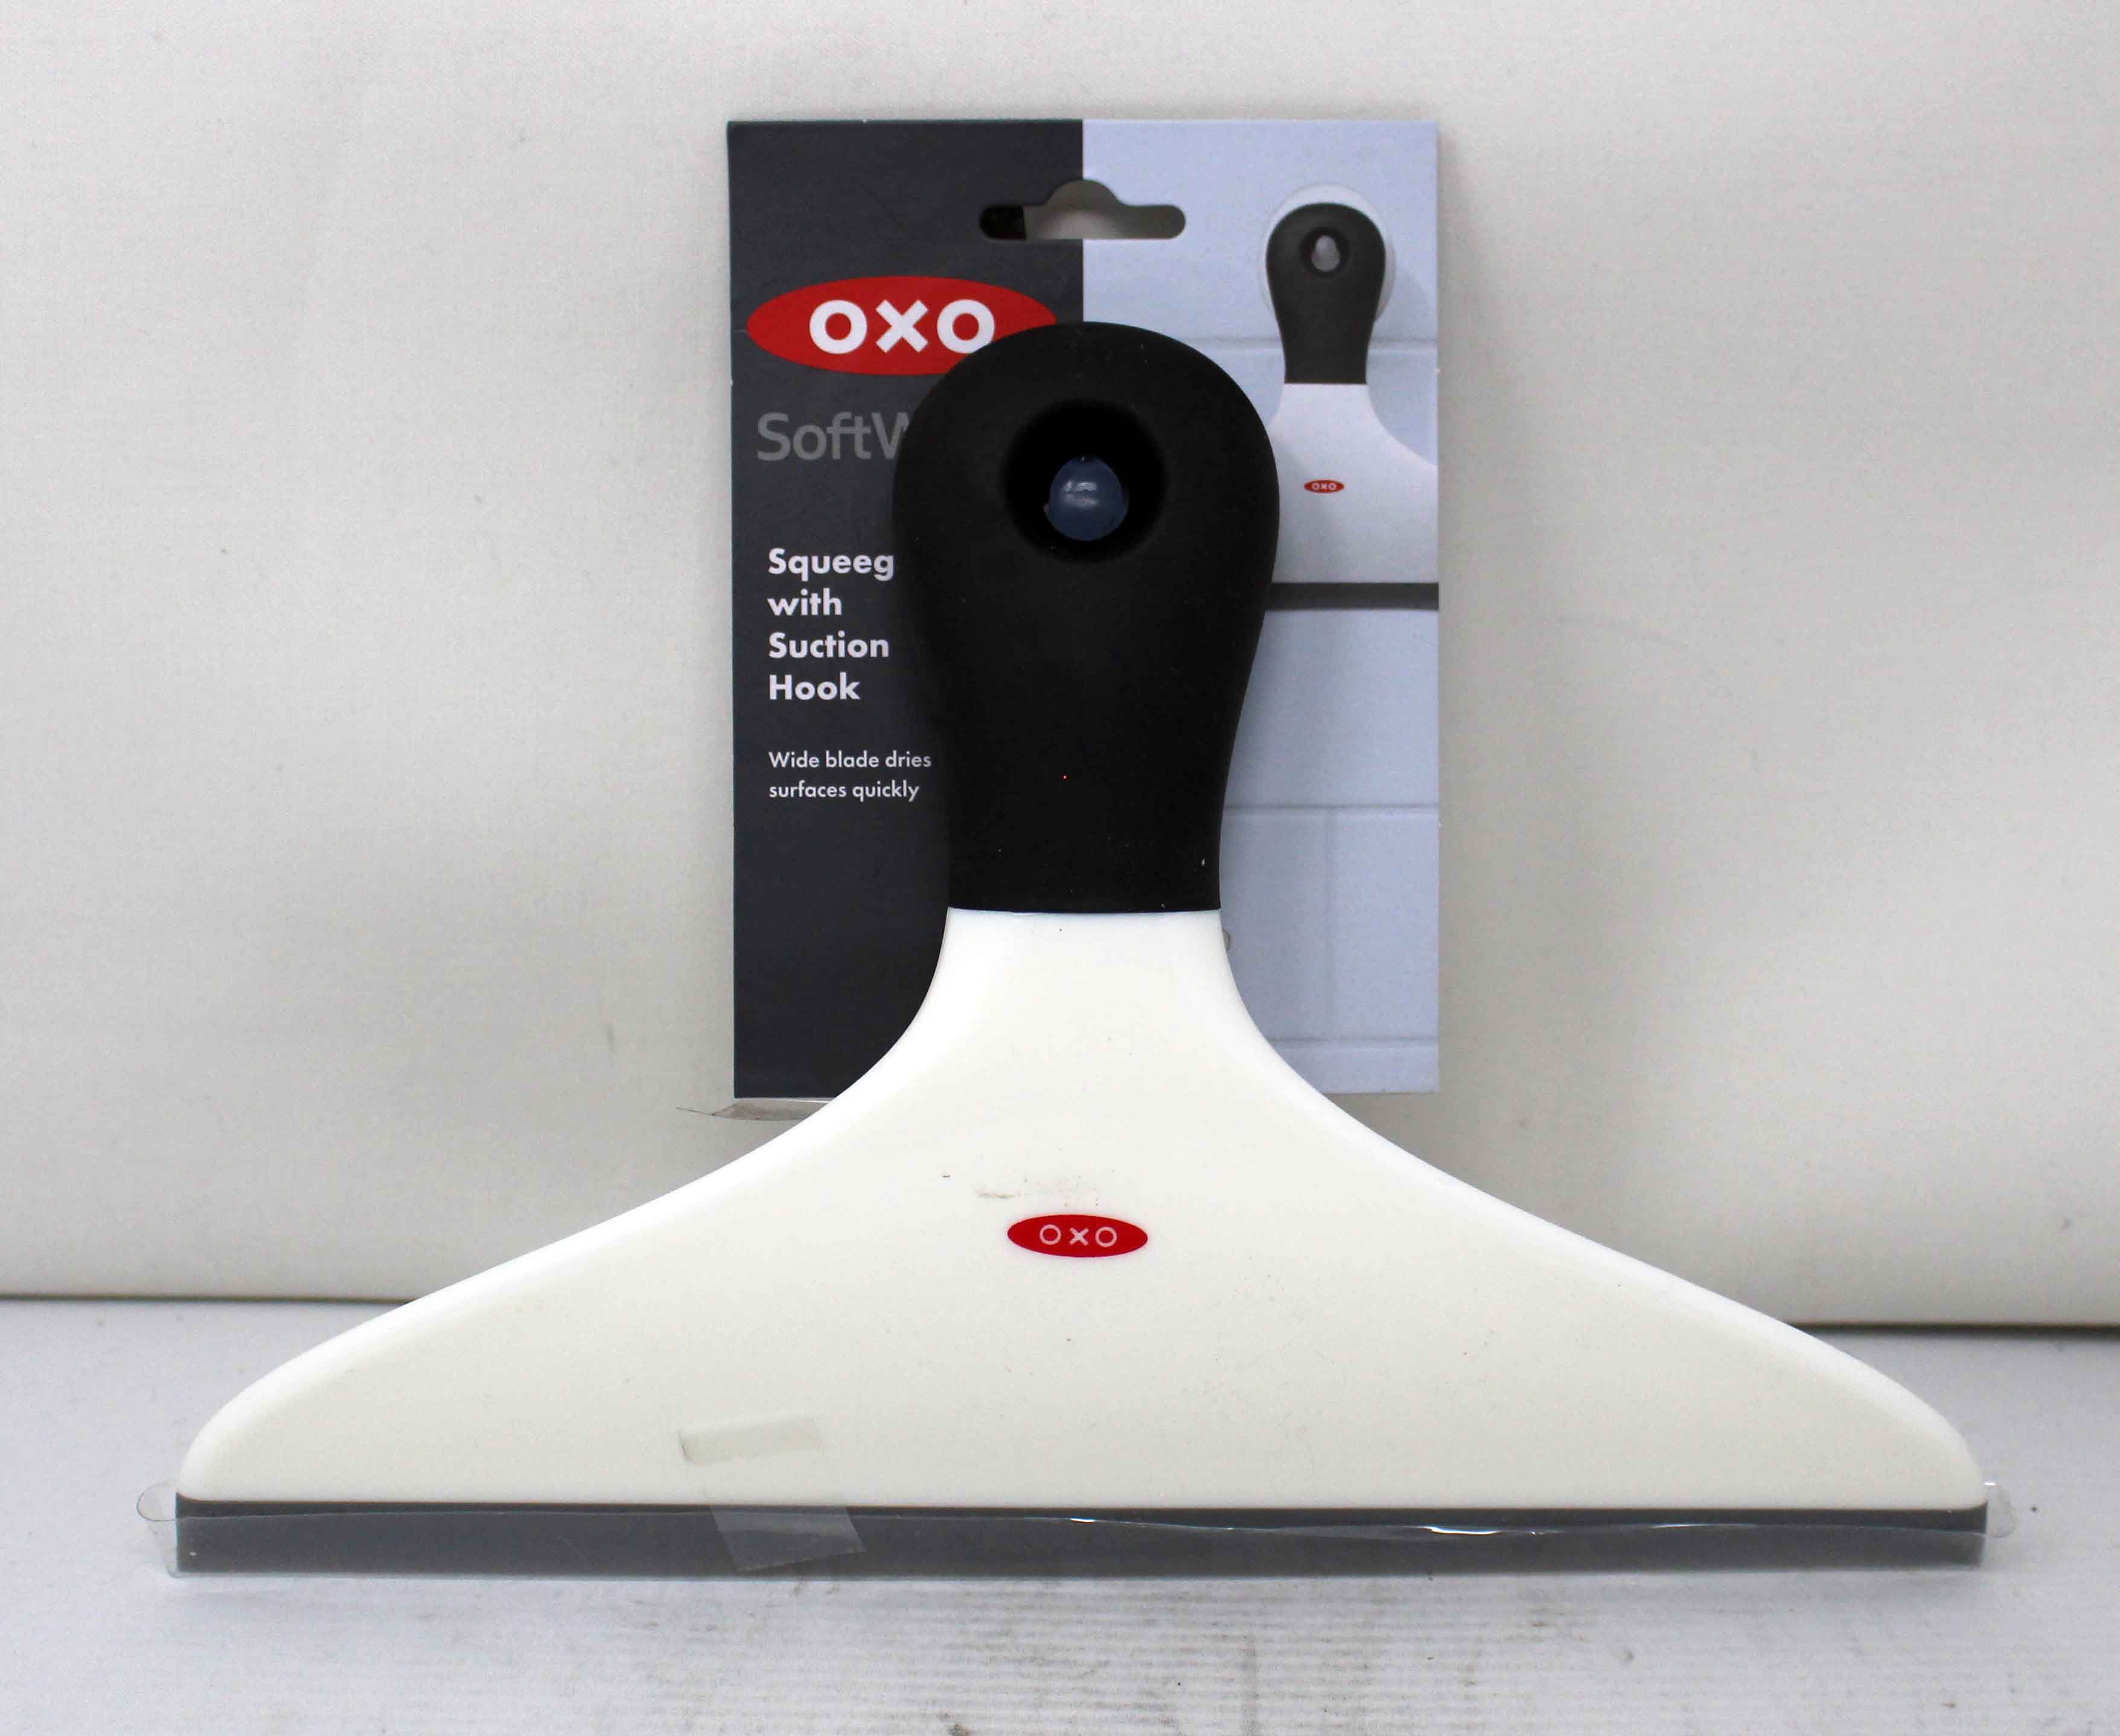 Shop Oxo Squeegee online